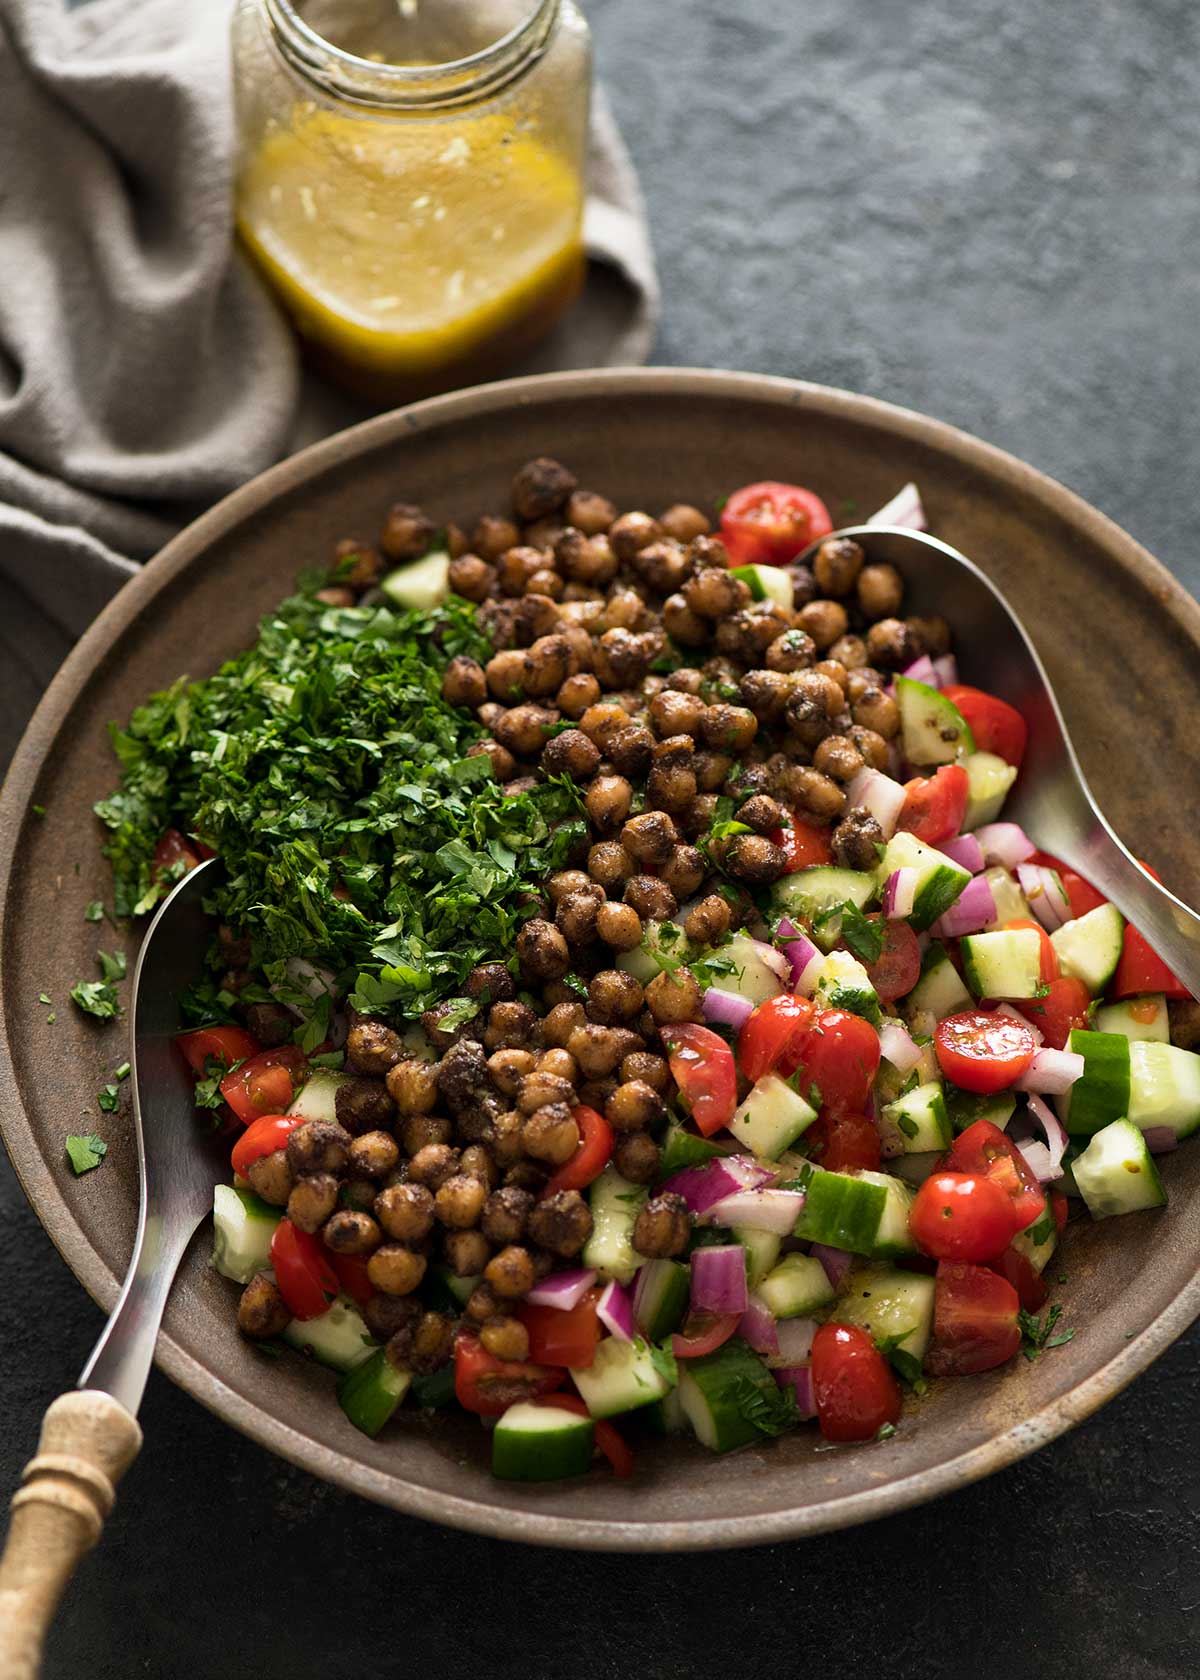 Middle Eastern Chickpea Salad from RecipeTin Eats